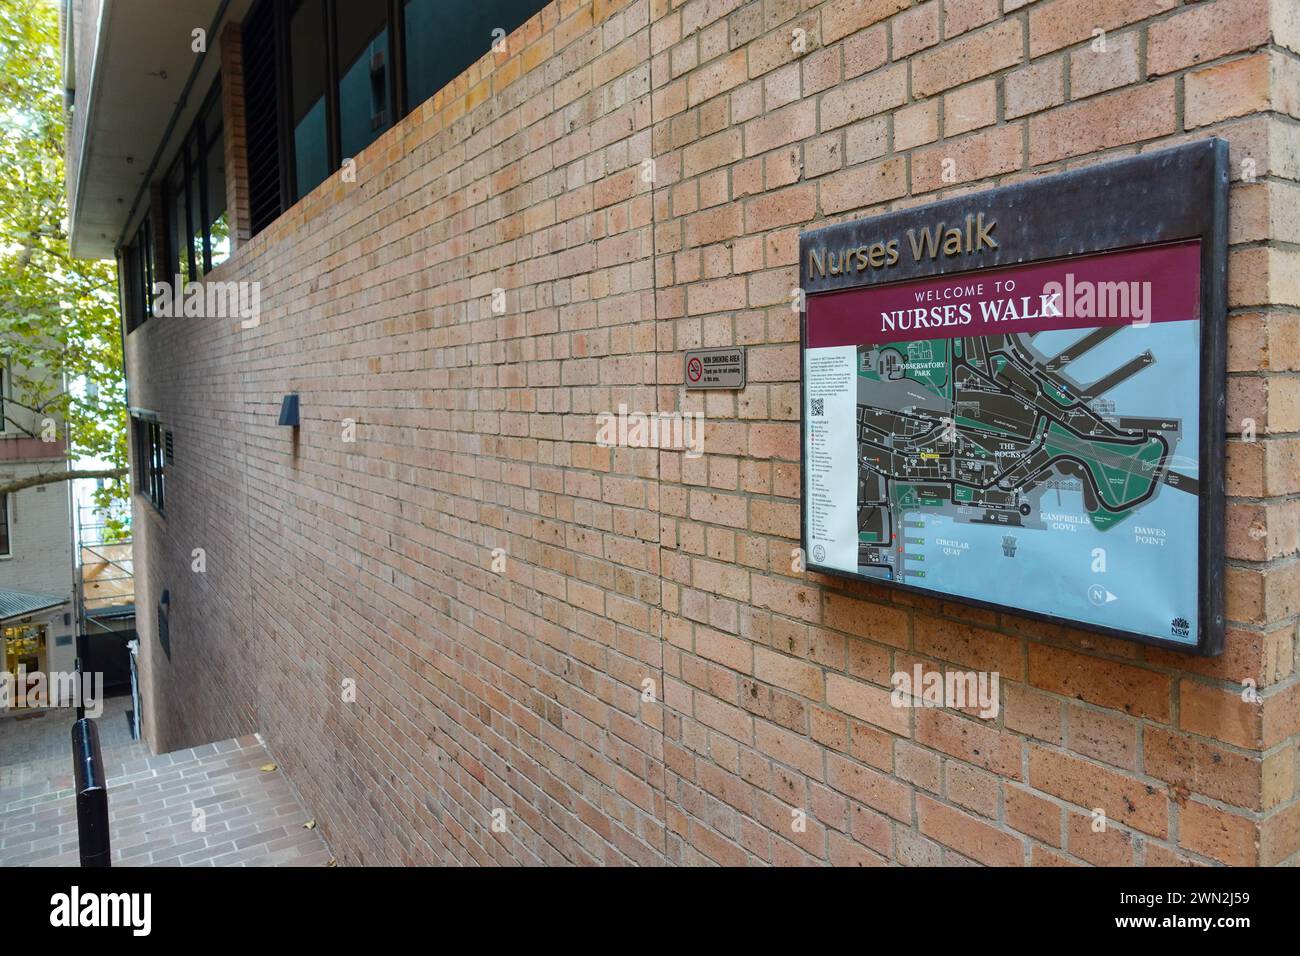 Nurse Walk is a popular laneway located in The Rocks, Sydney, Australia. It was established in 1979 to commemorate the nurses who worked in the area’s Stock Photo